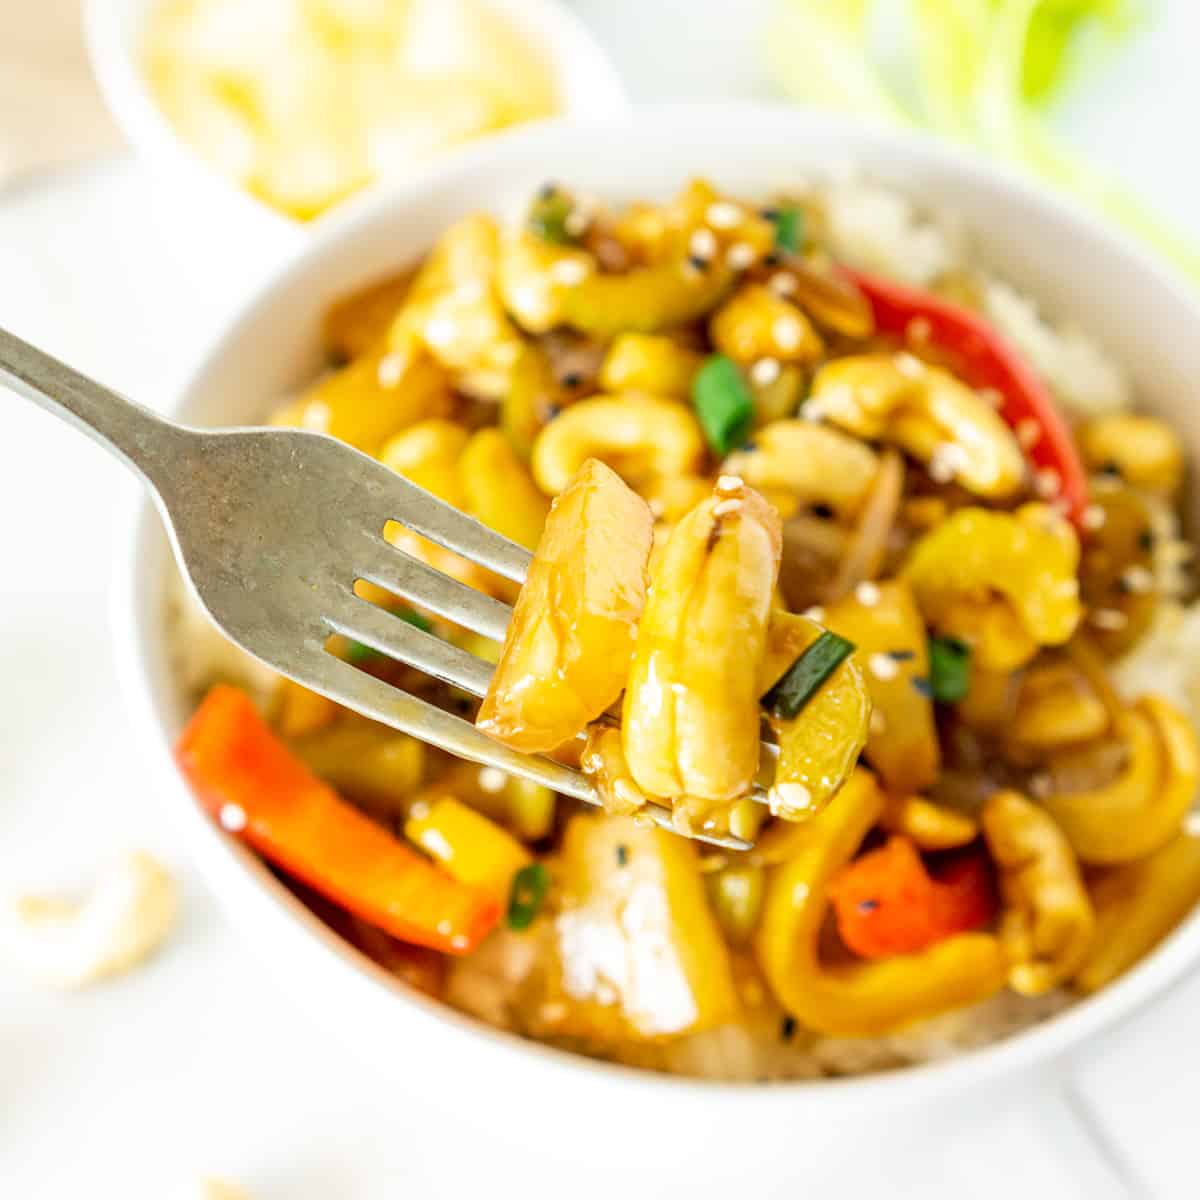 stir fried cashew and pineapple pieces on a fork